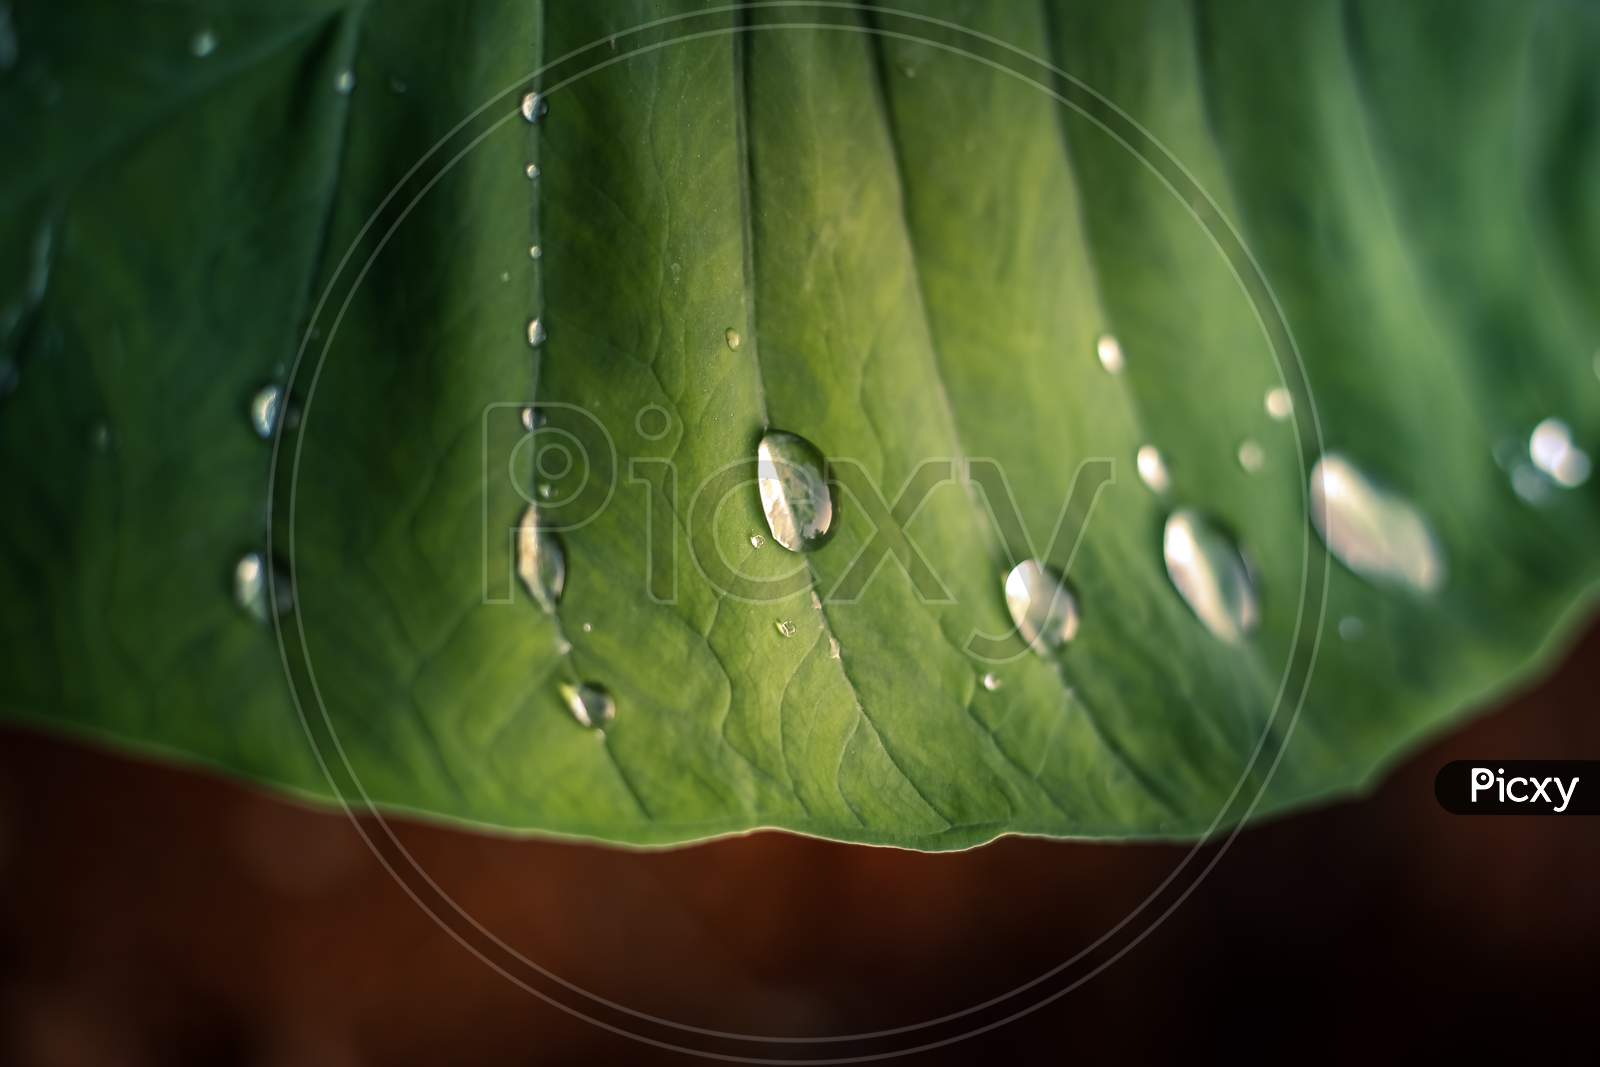 Green Textured Colocasia Yam Leaf With Water Droplets Close Up Shot